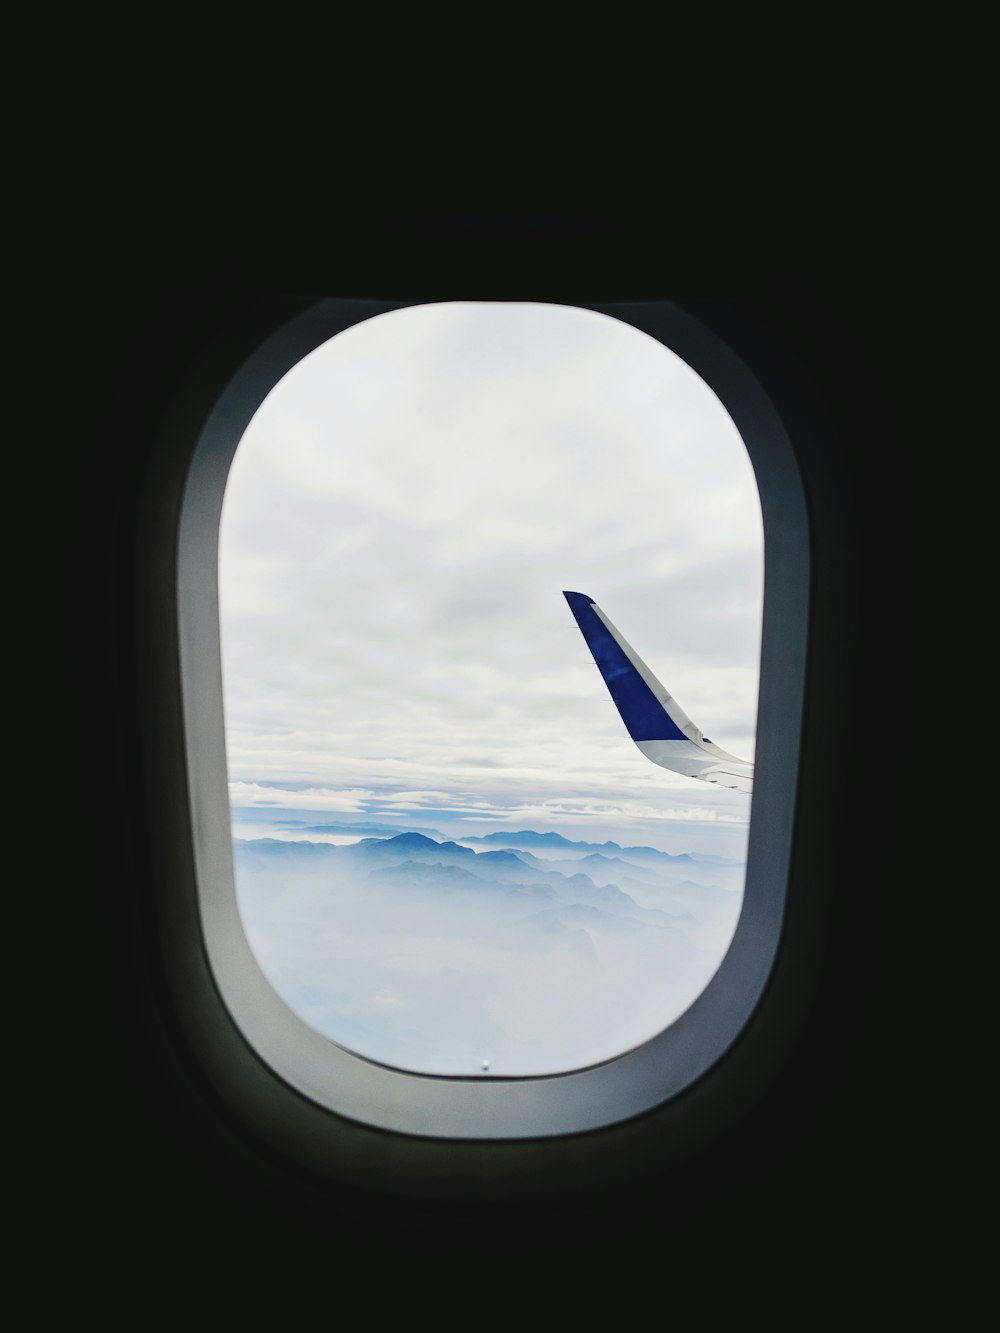 blue painted airliner wing tip seen through window